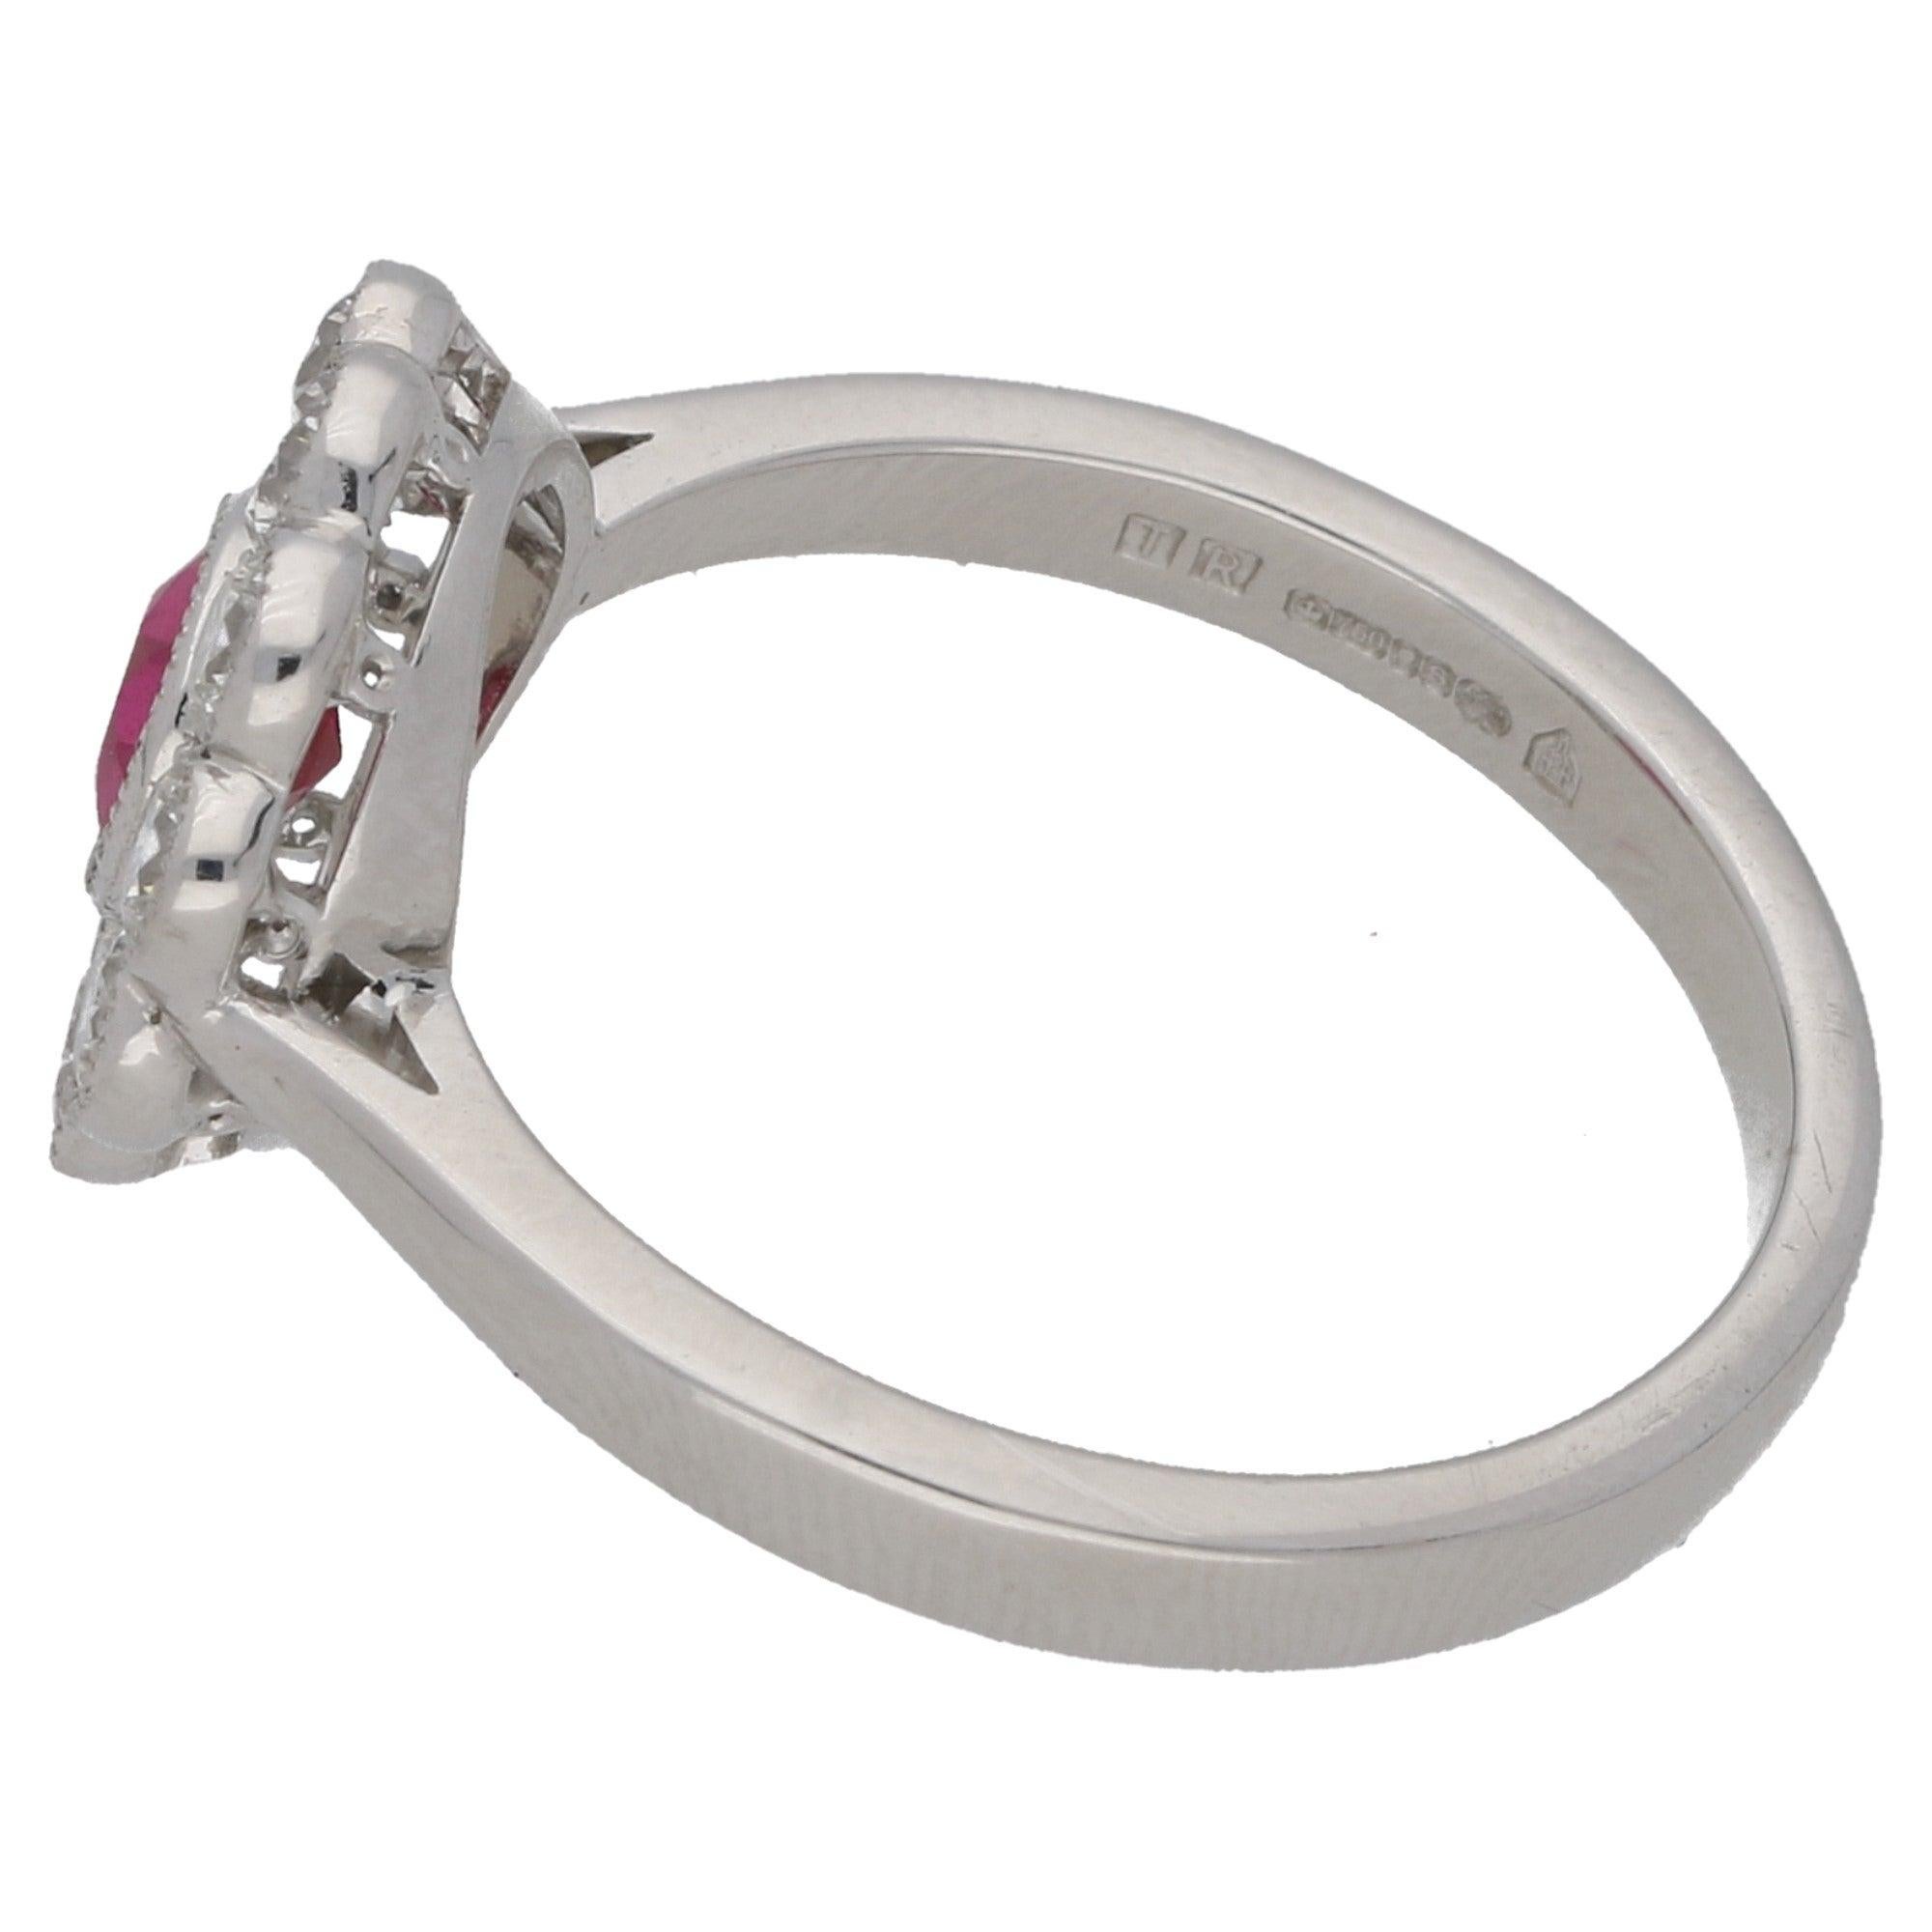 An extremely sweet diamond and ruby engagement/cocktail cluster ring set in 18 carat white gold. The ruby is rub over set to centre amongst a halo of ten round brilliant cut diamonds in the same setting.

This is a beautiful piece that could be worn